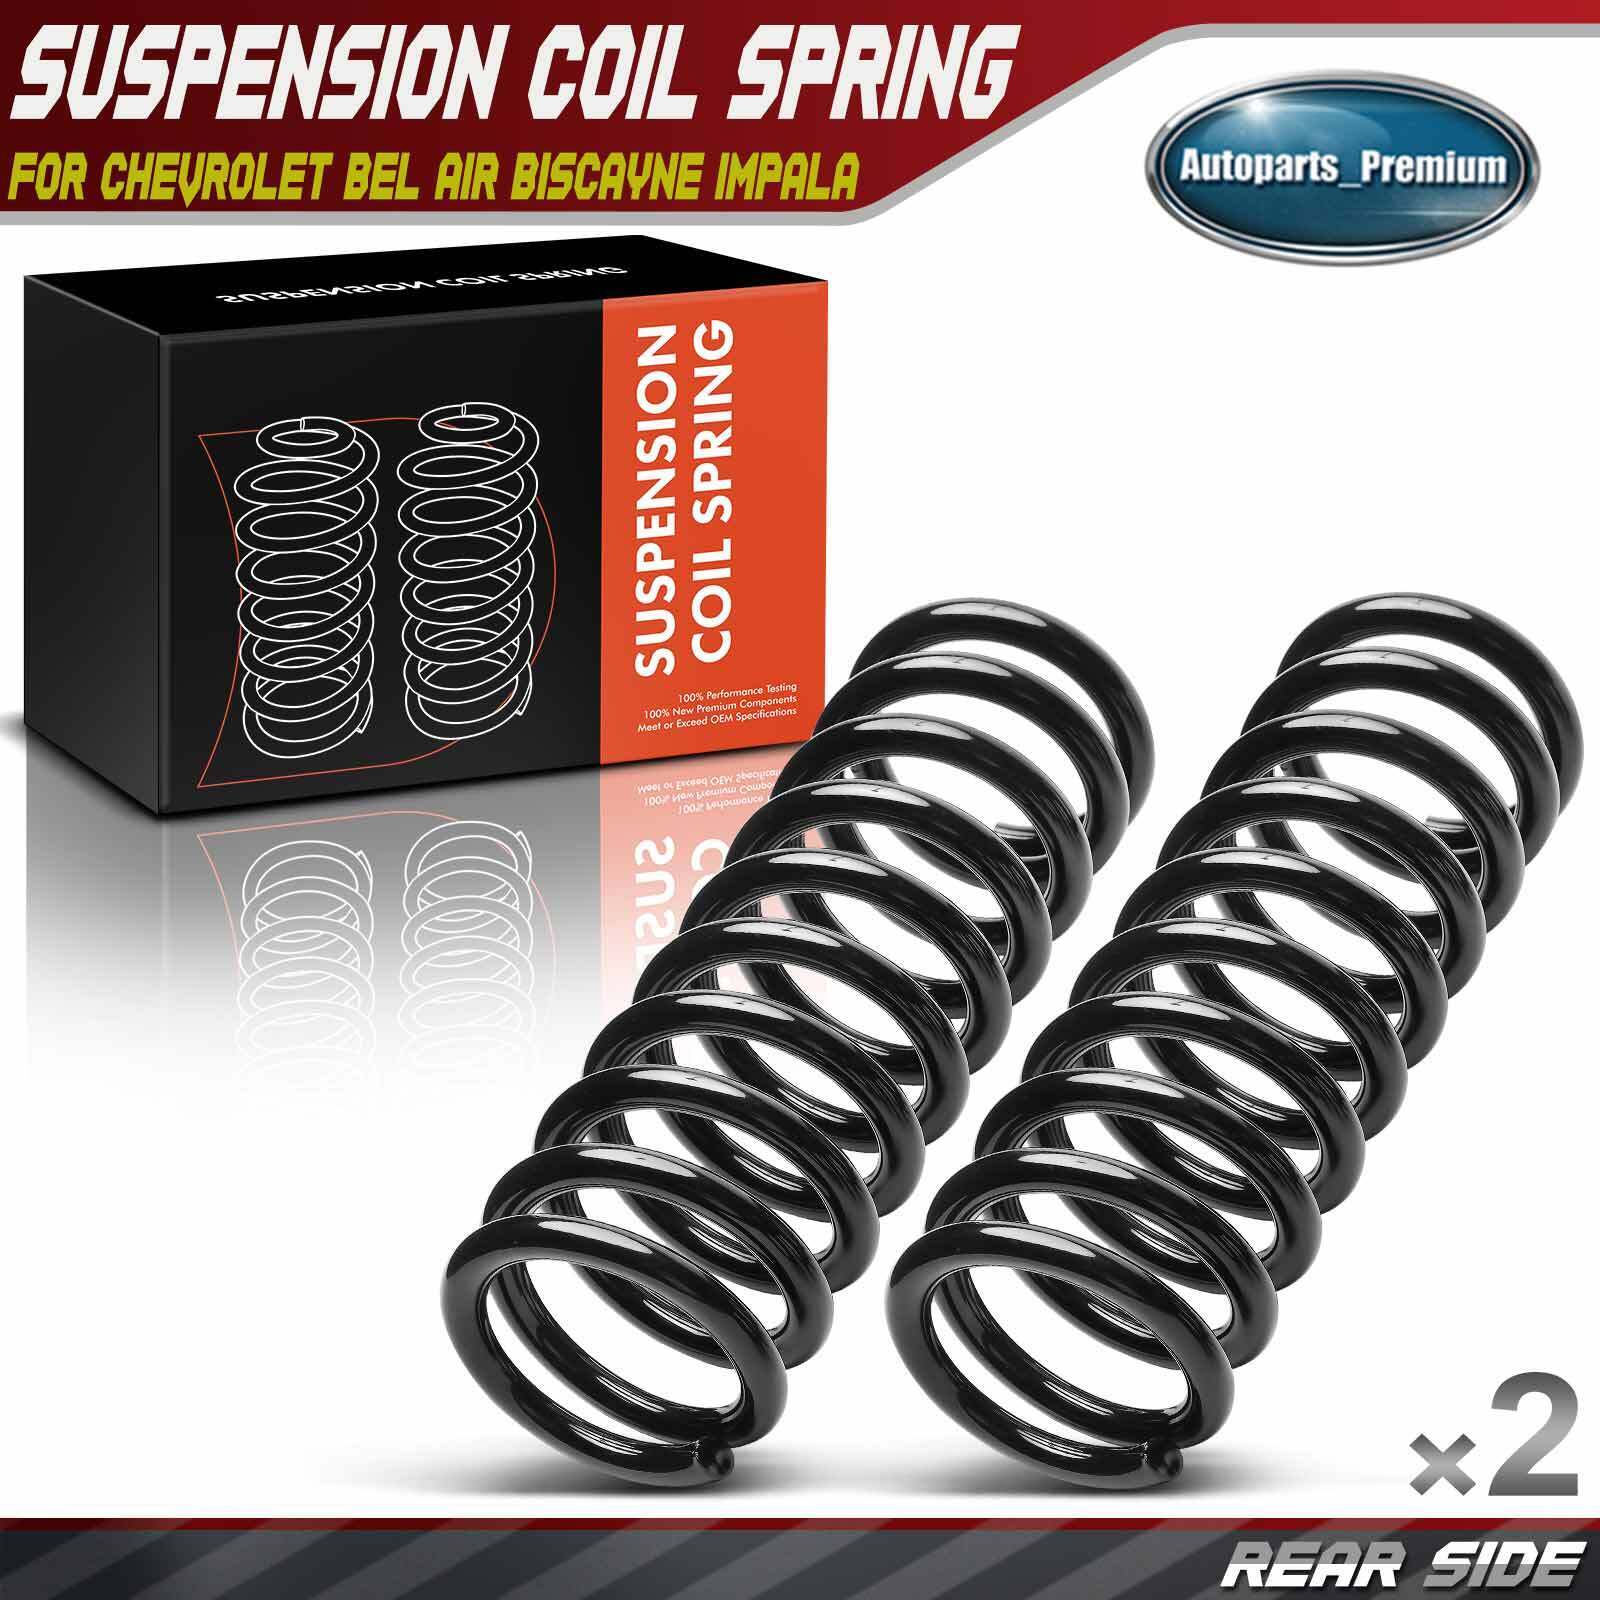 2x Rear Left & Right Coil Spring for Chevrolet Bel Air Biscayne Impala 1959-1964